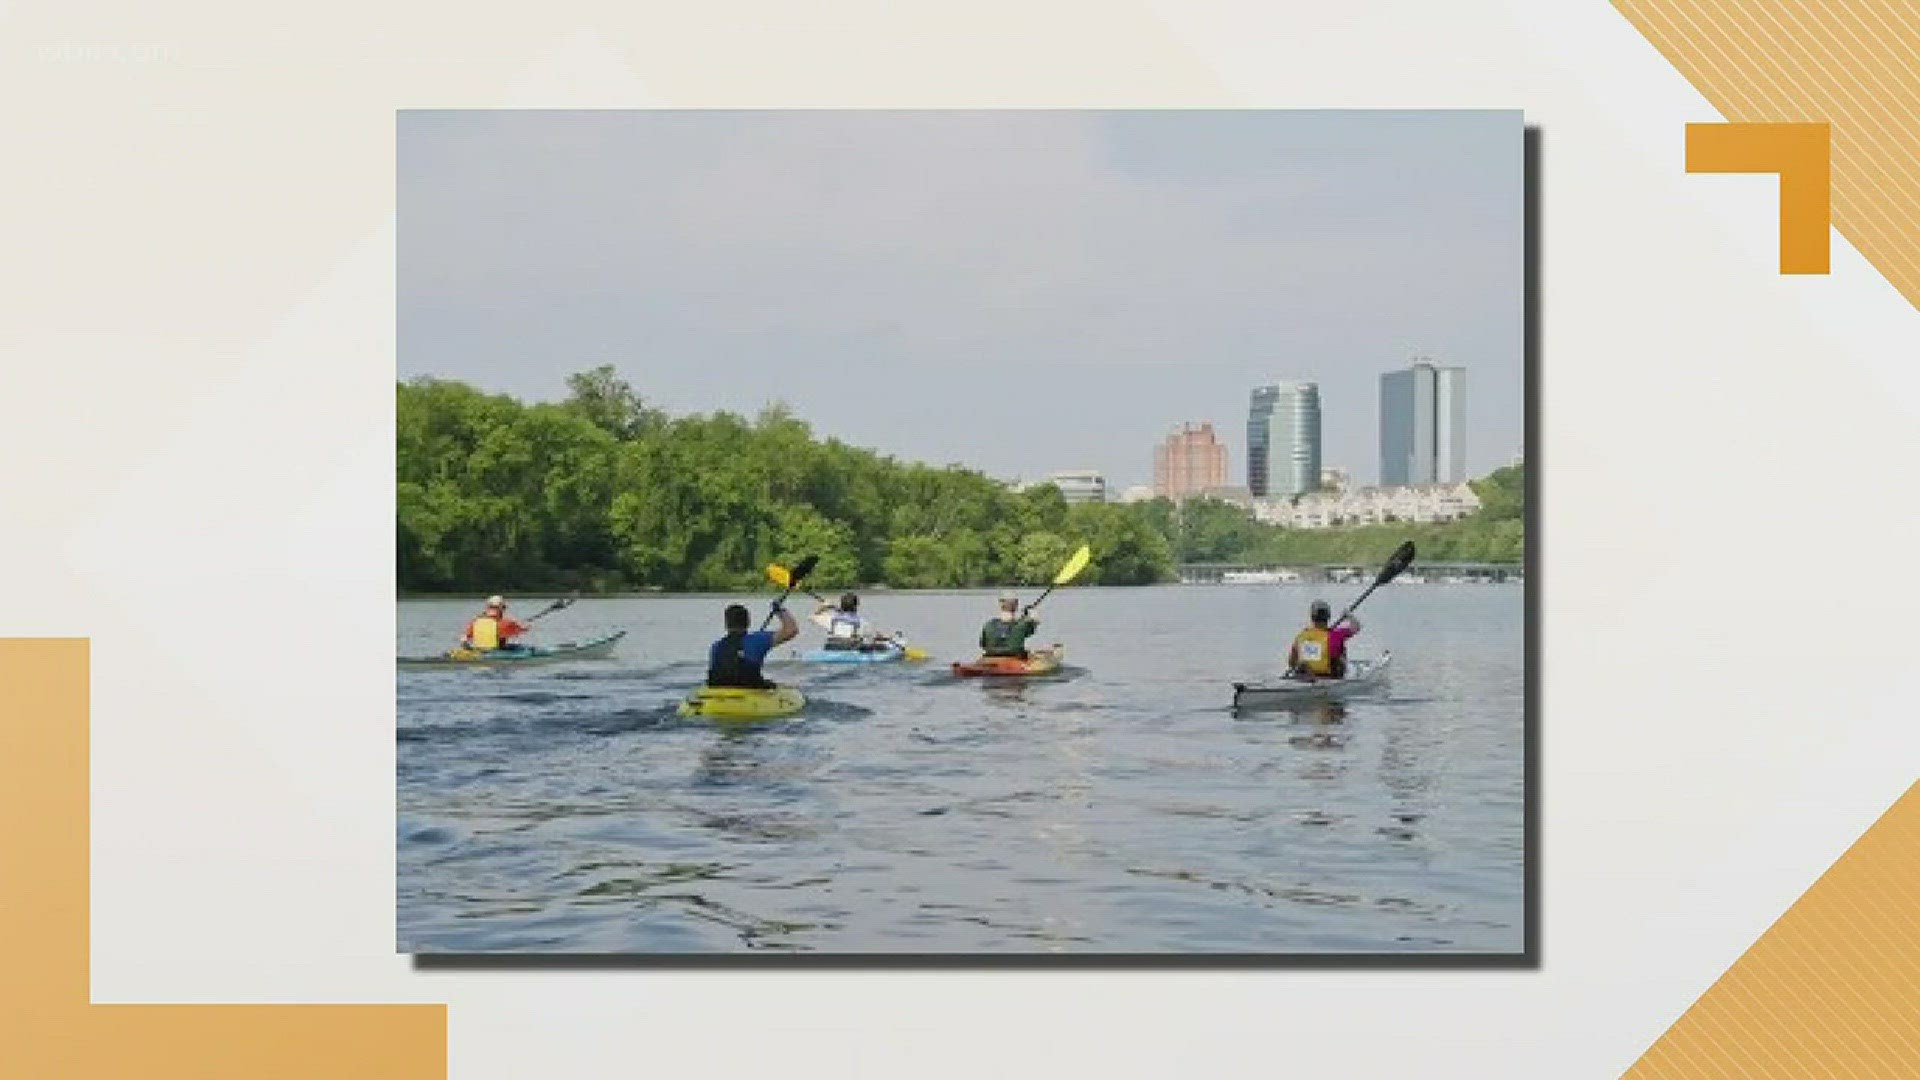 Bart Carey from Legacy Parks shares where and how to get out on the water to beat the heat.